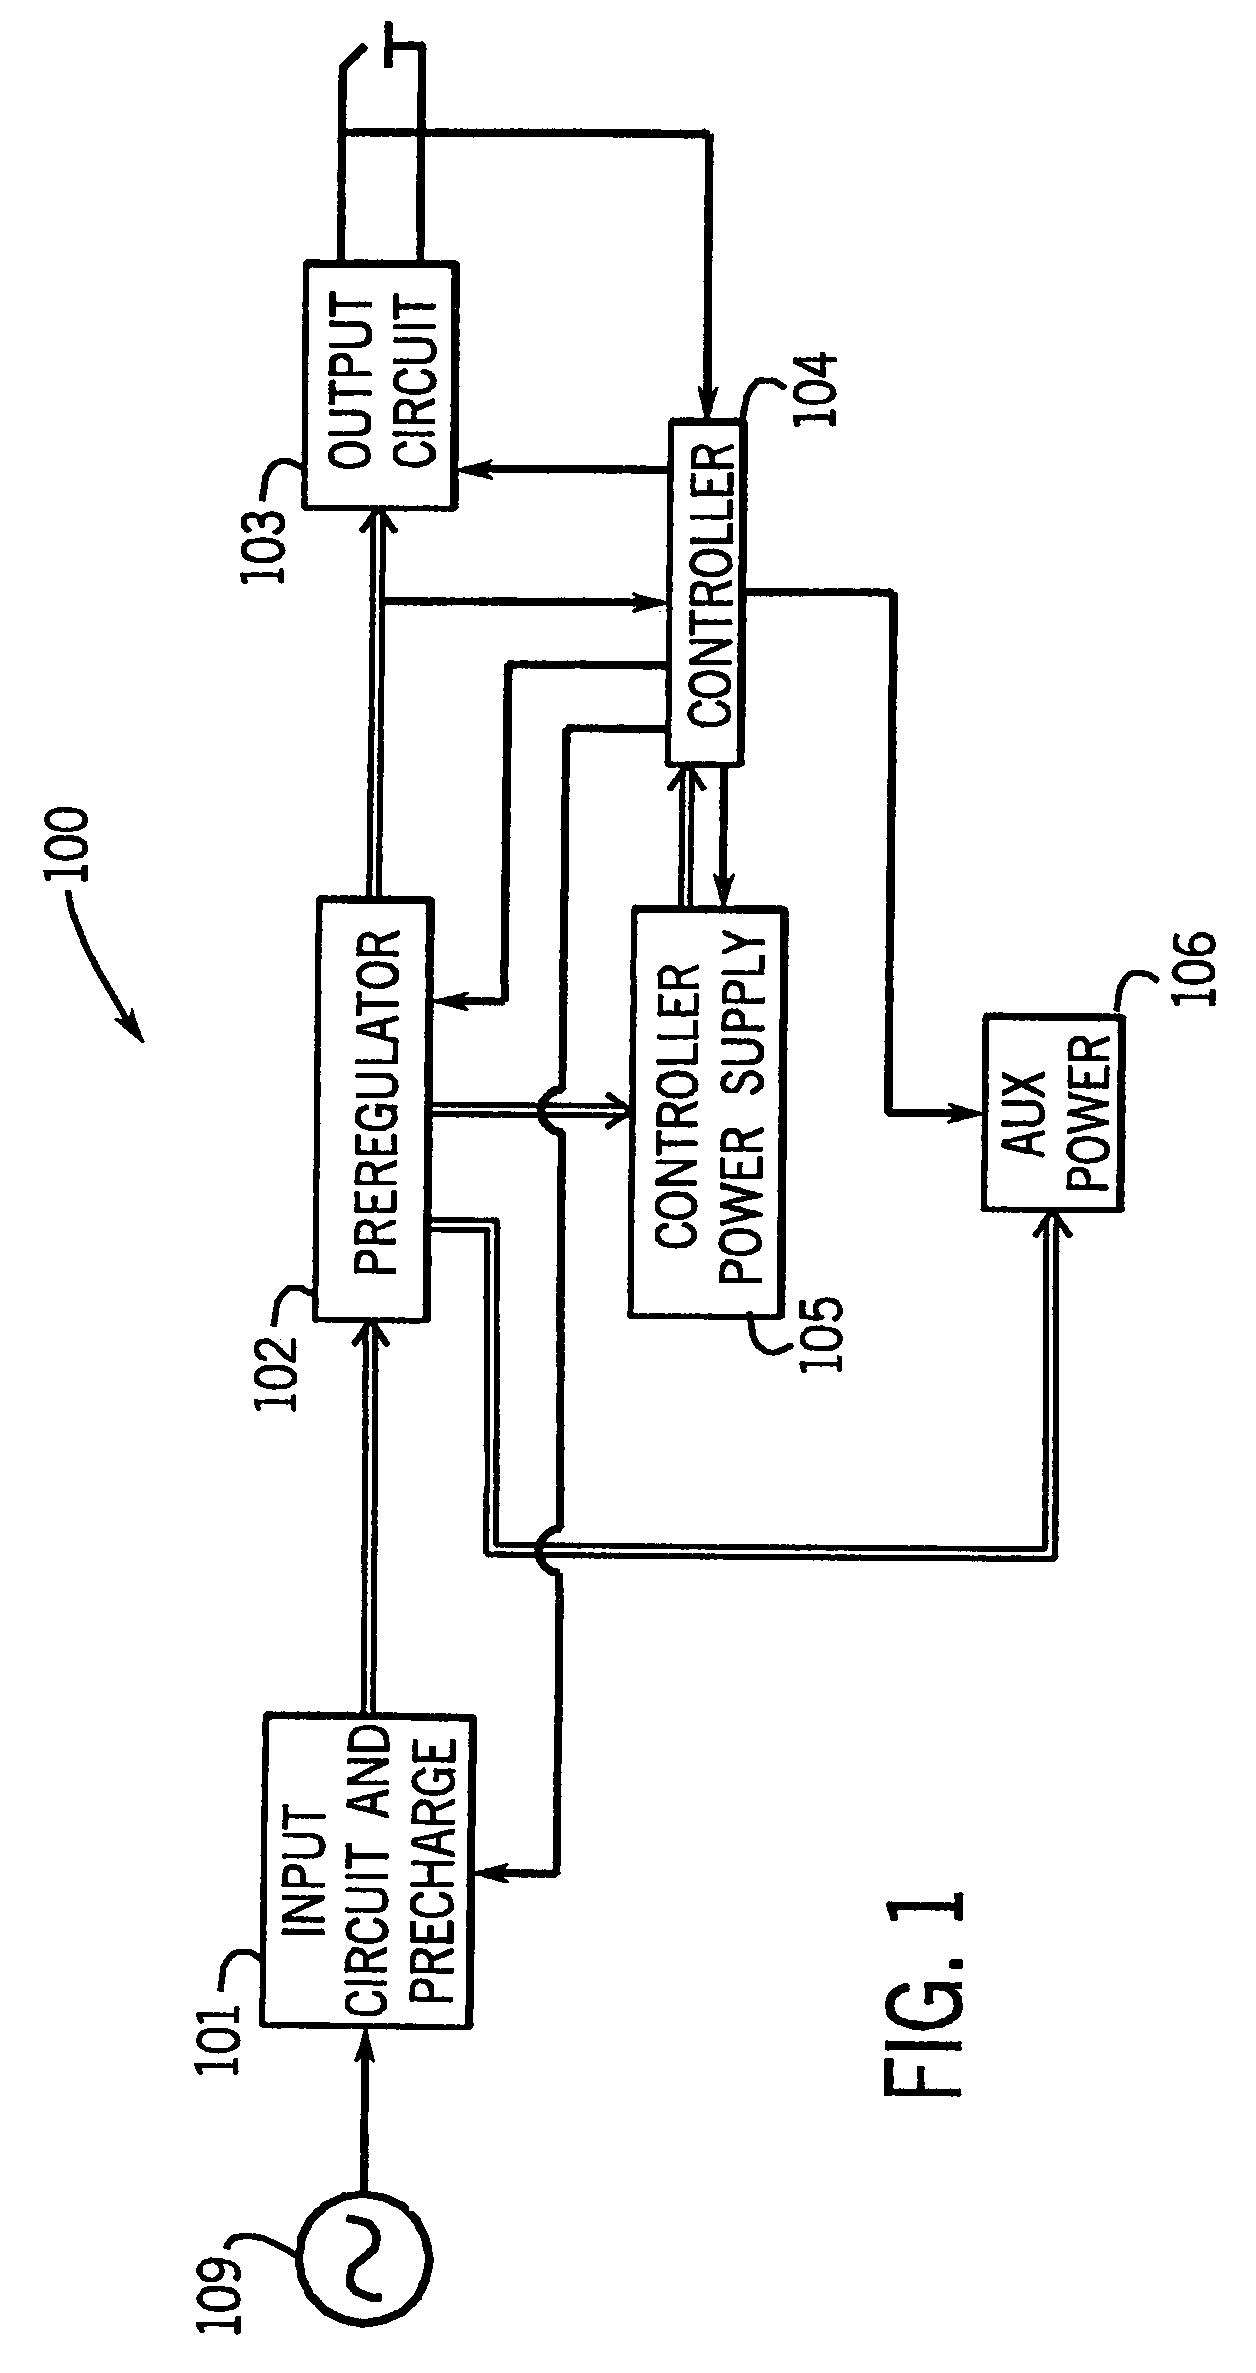 Method and apparatus for receiving a universal input voltage in a welding, plasma or heating power source